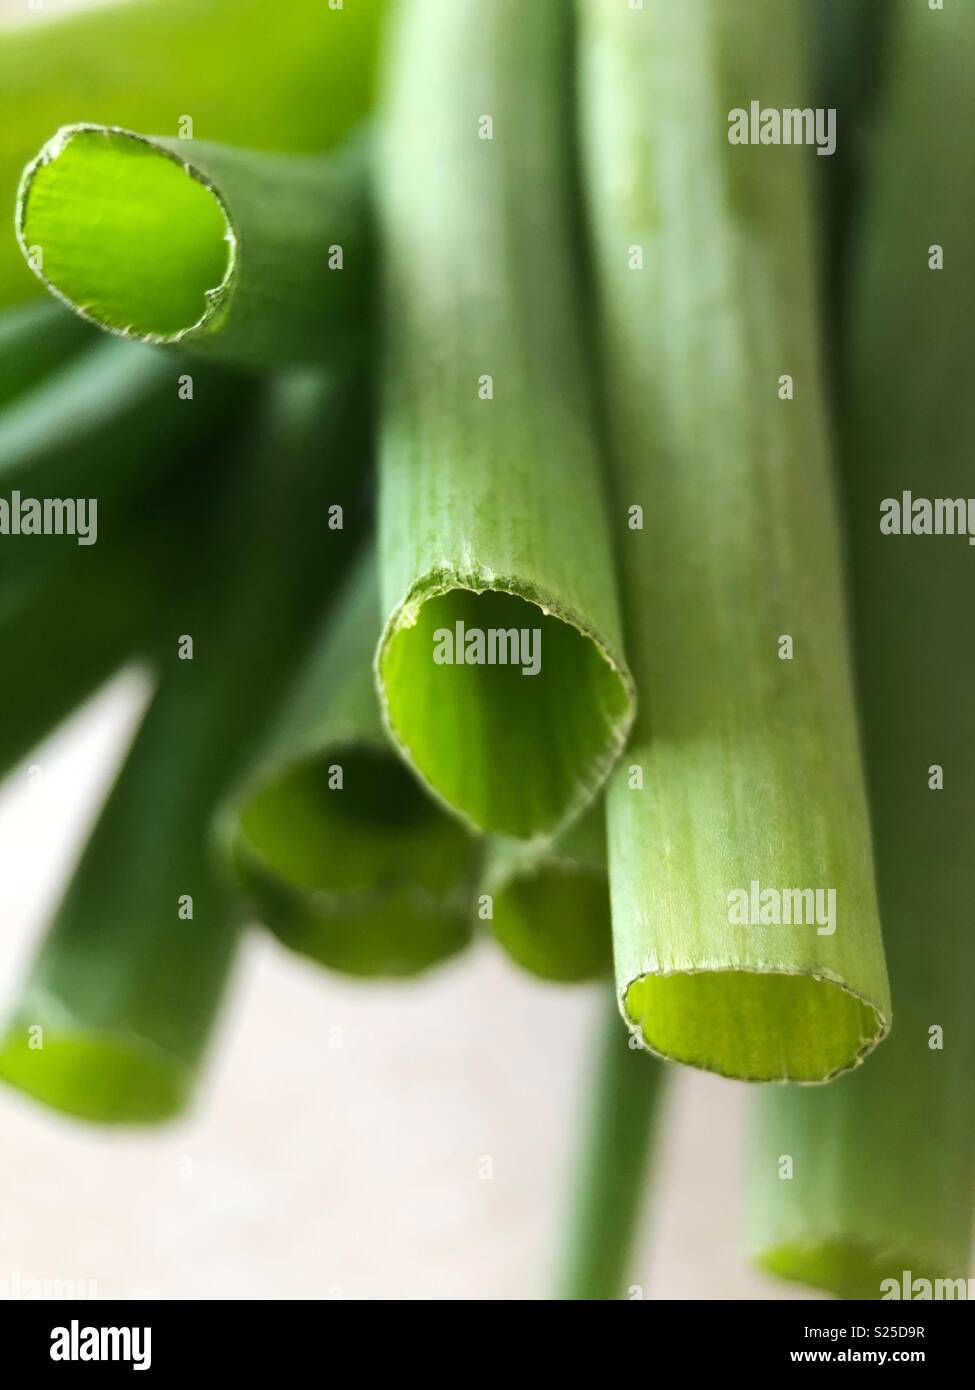 Up close of green onions Stock Photo